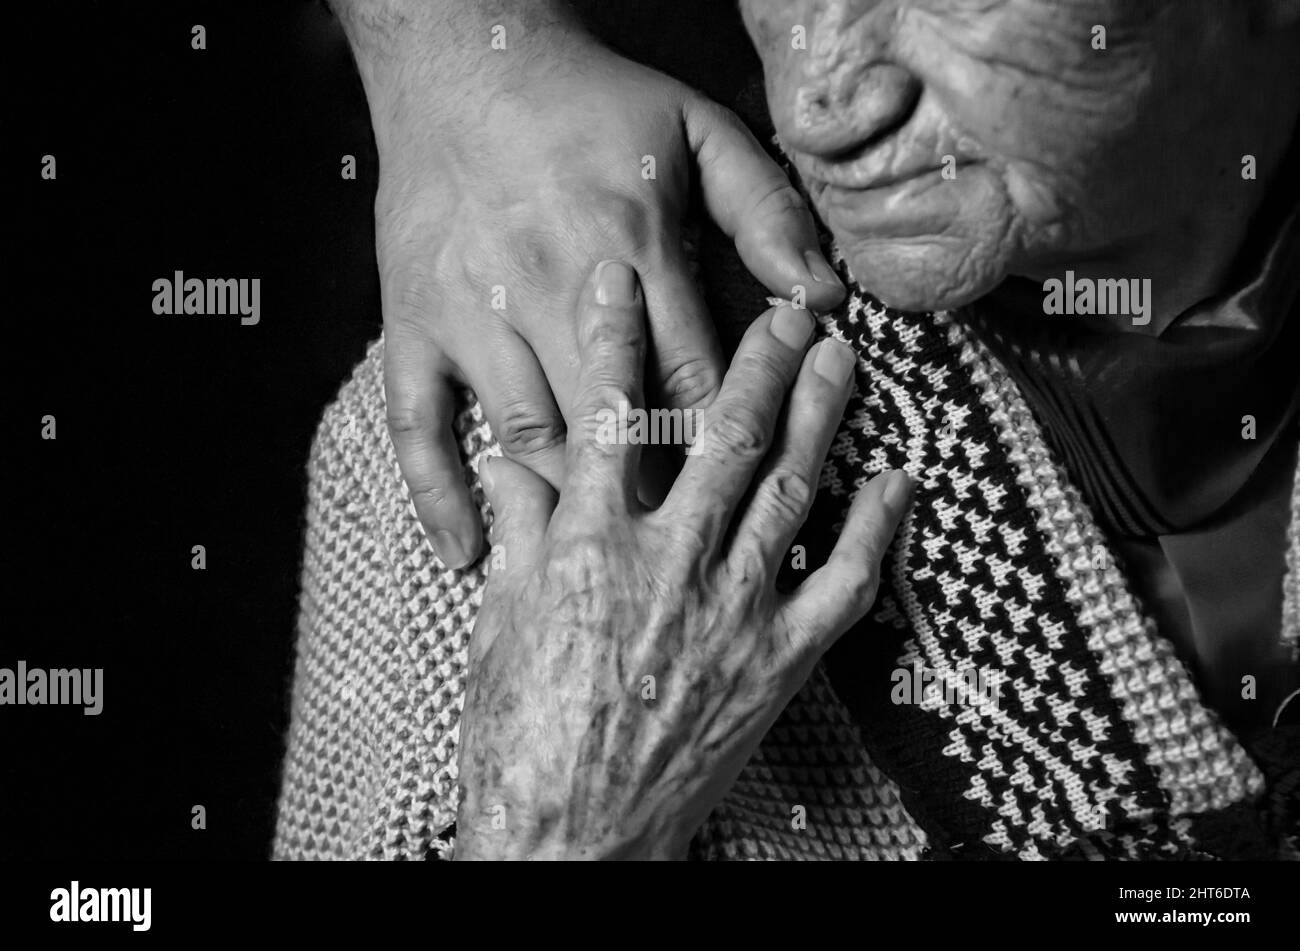 Hands of an elderly woman against black background. black and white photo. Stock Photo